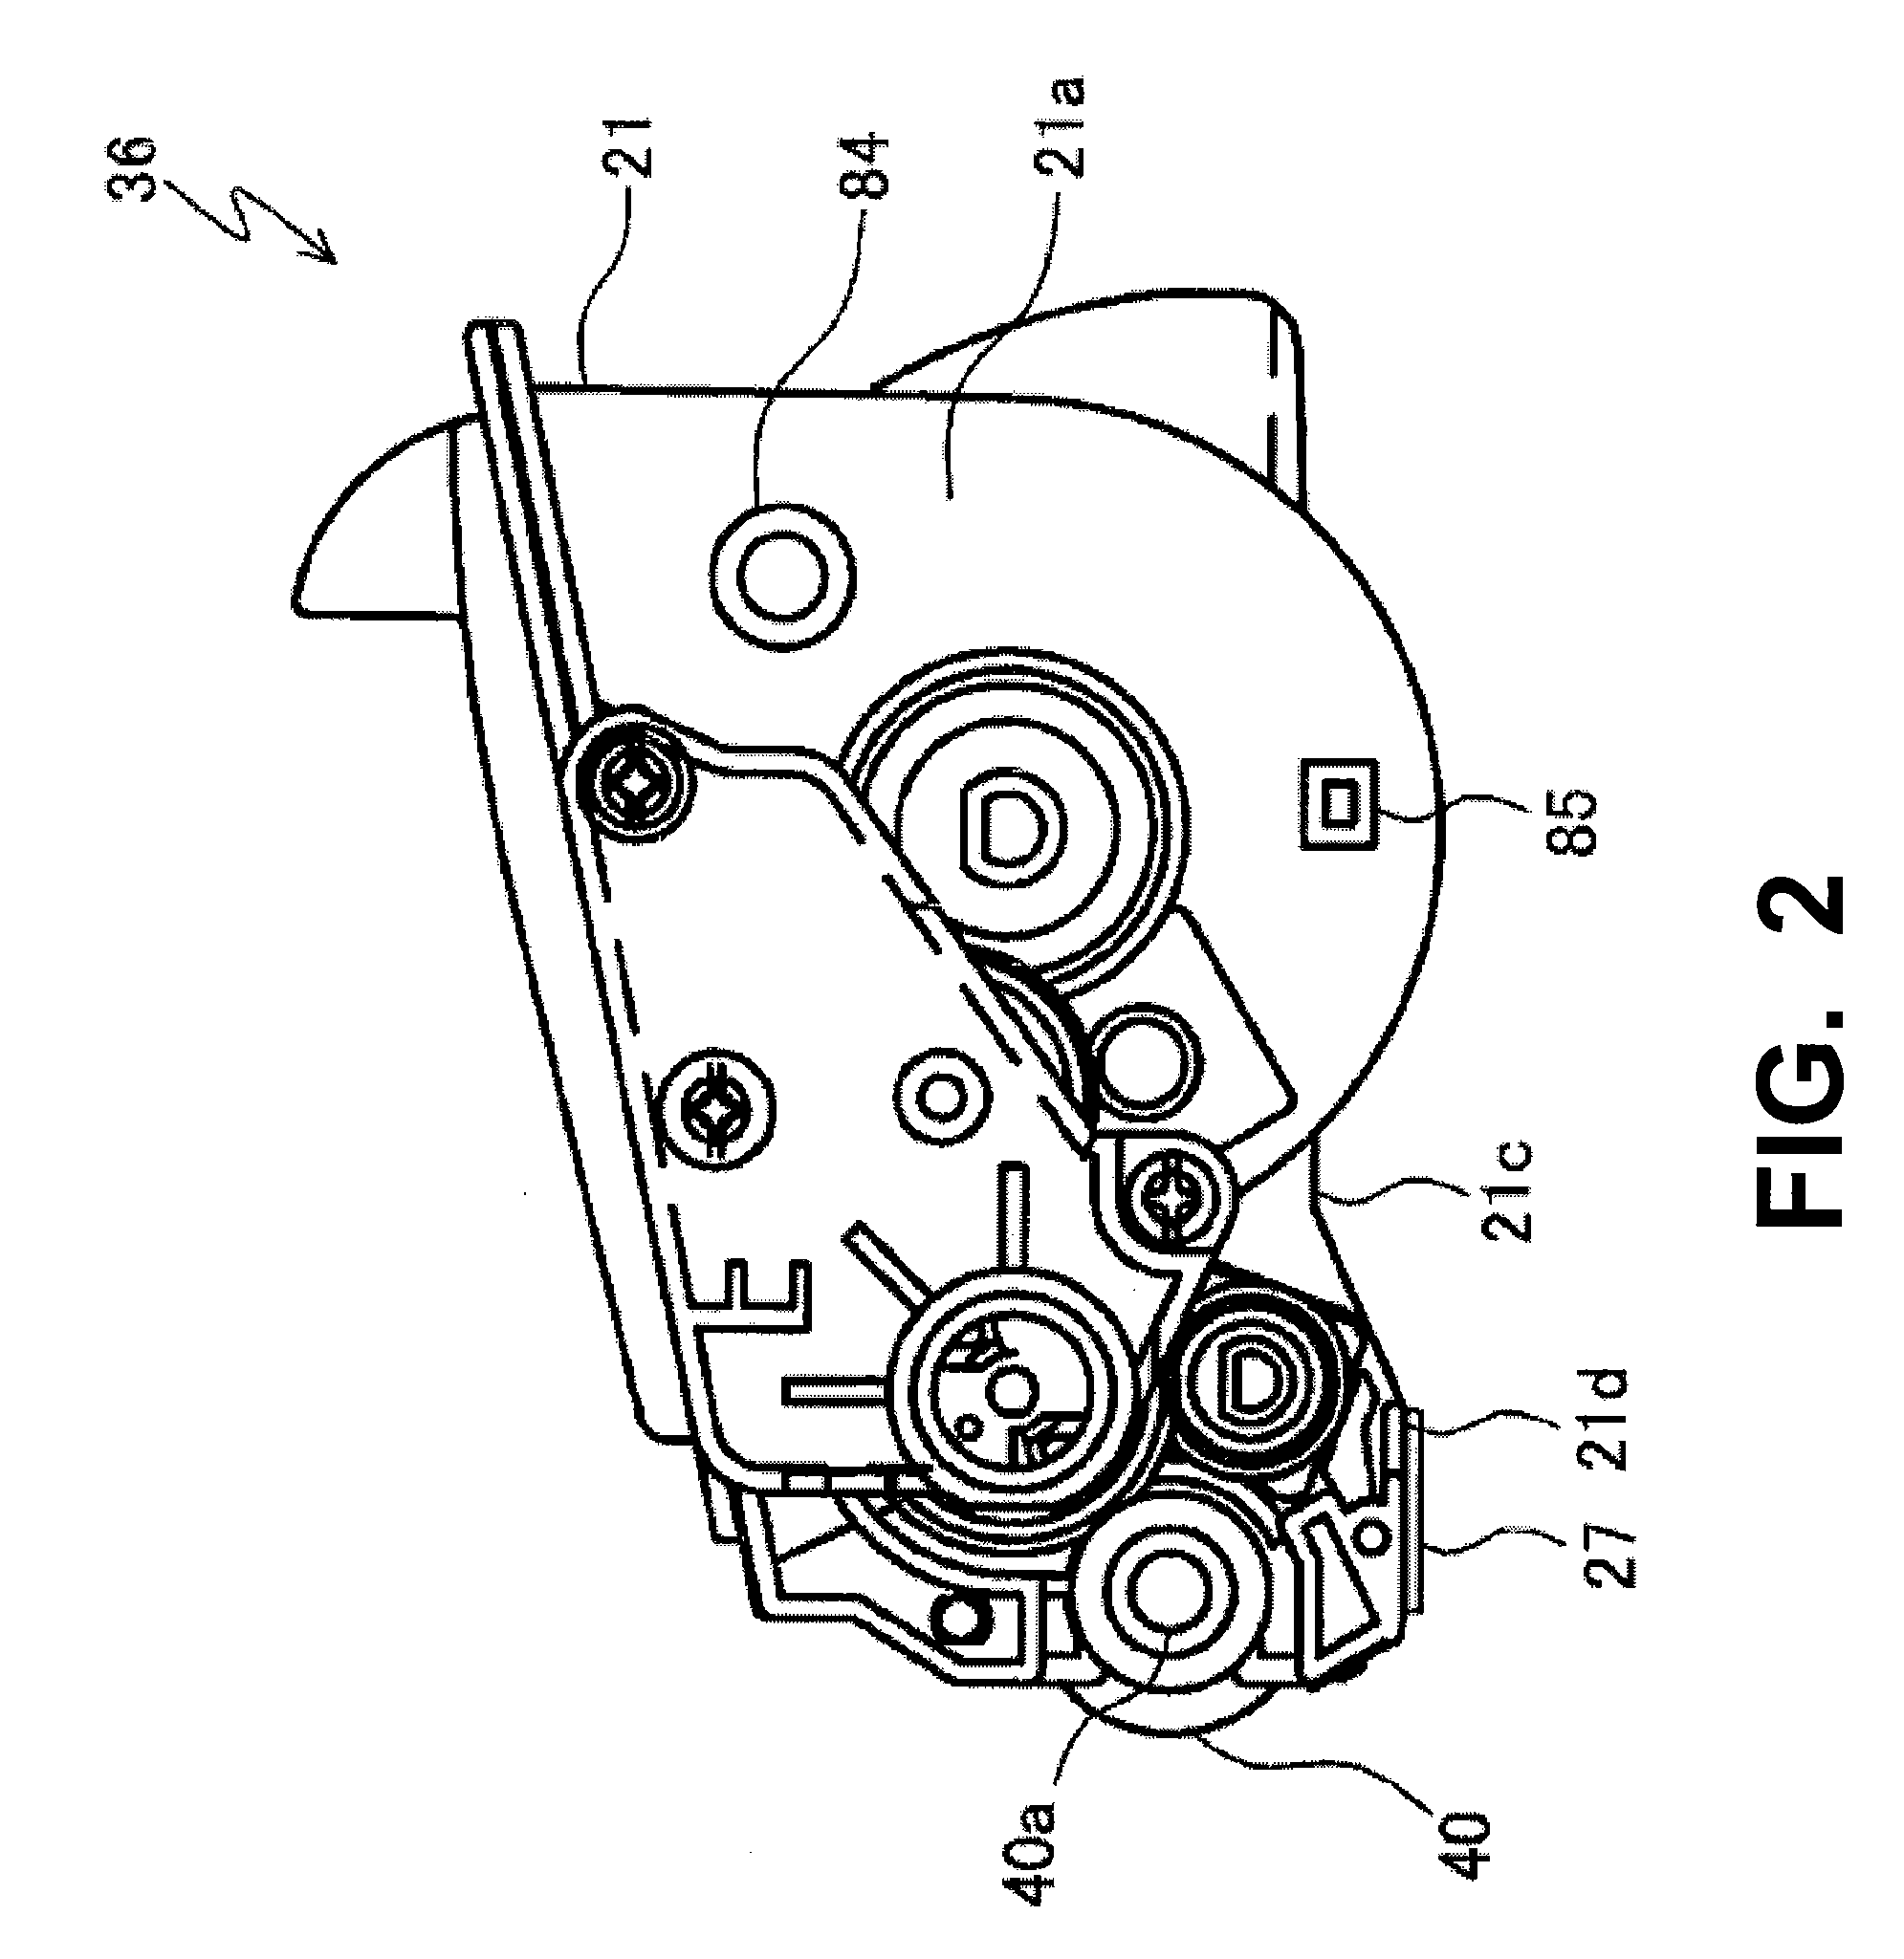 Image forming apparatus, process unit, and developing cartridge